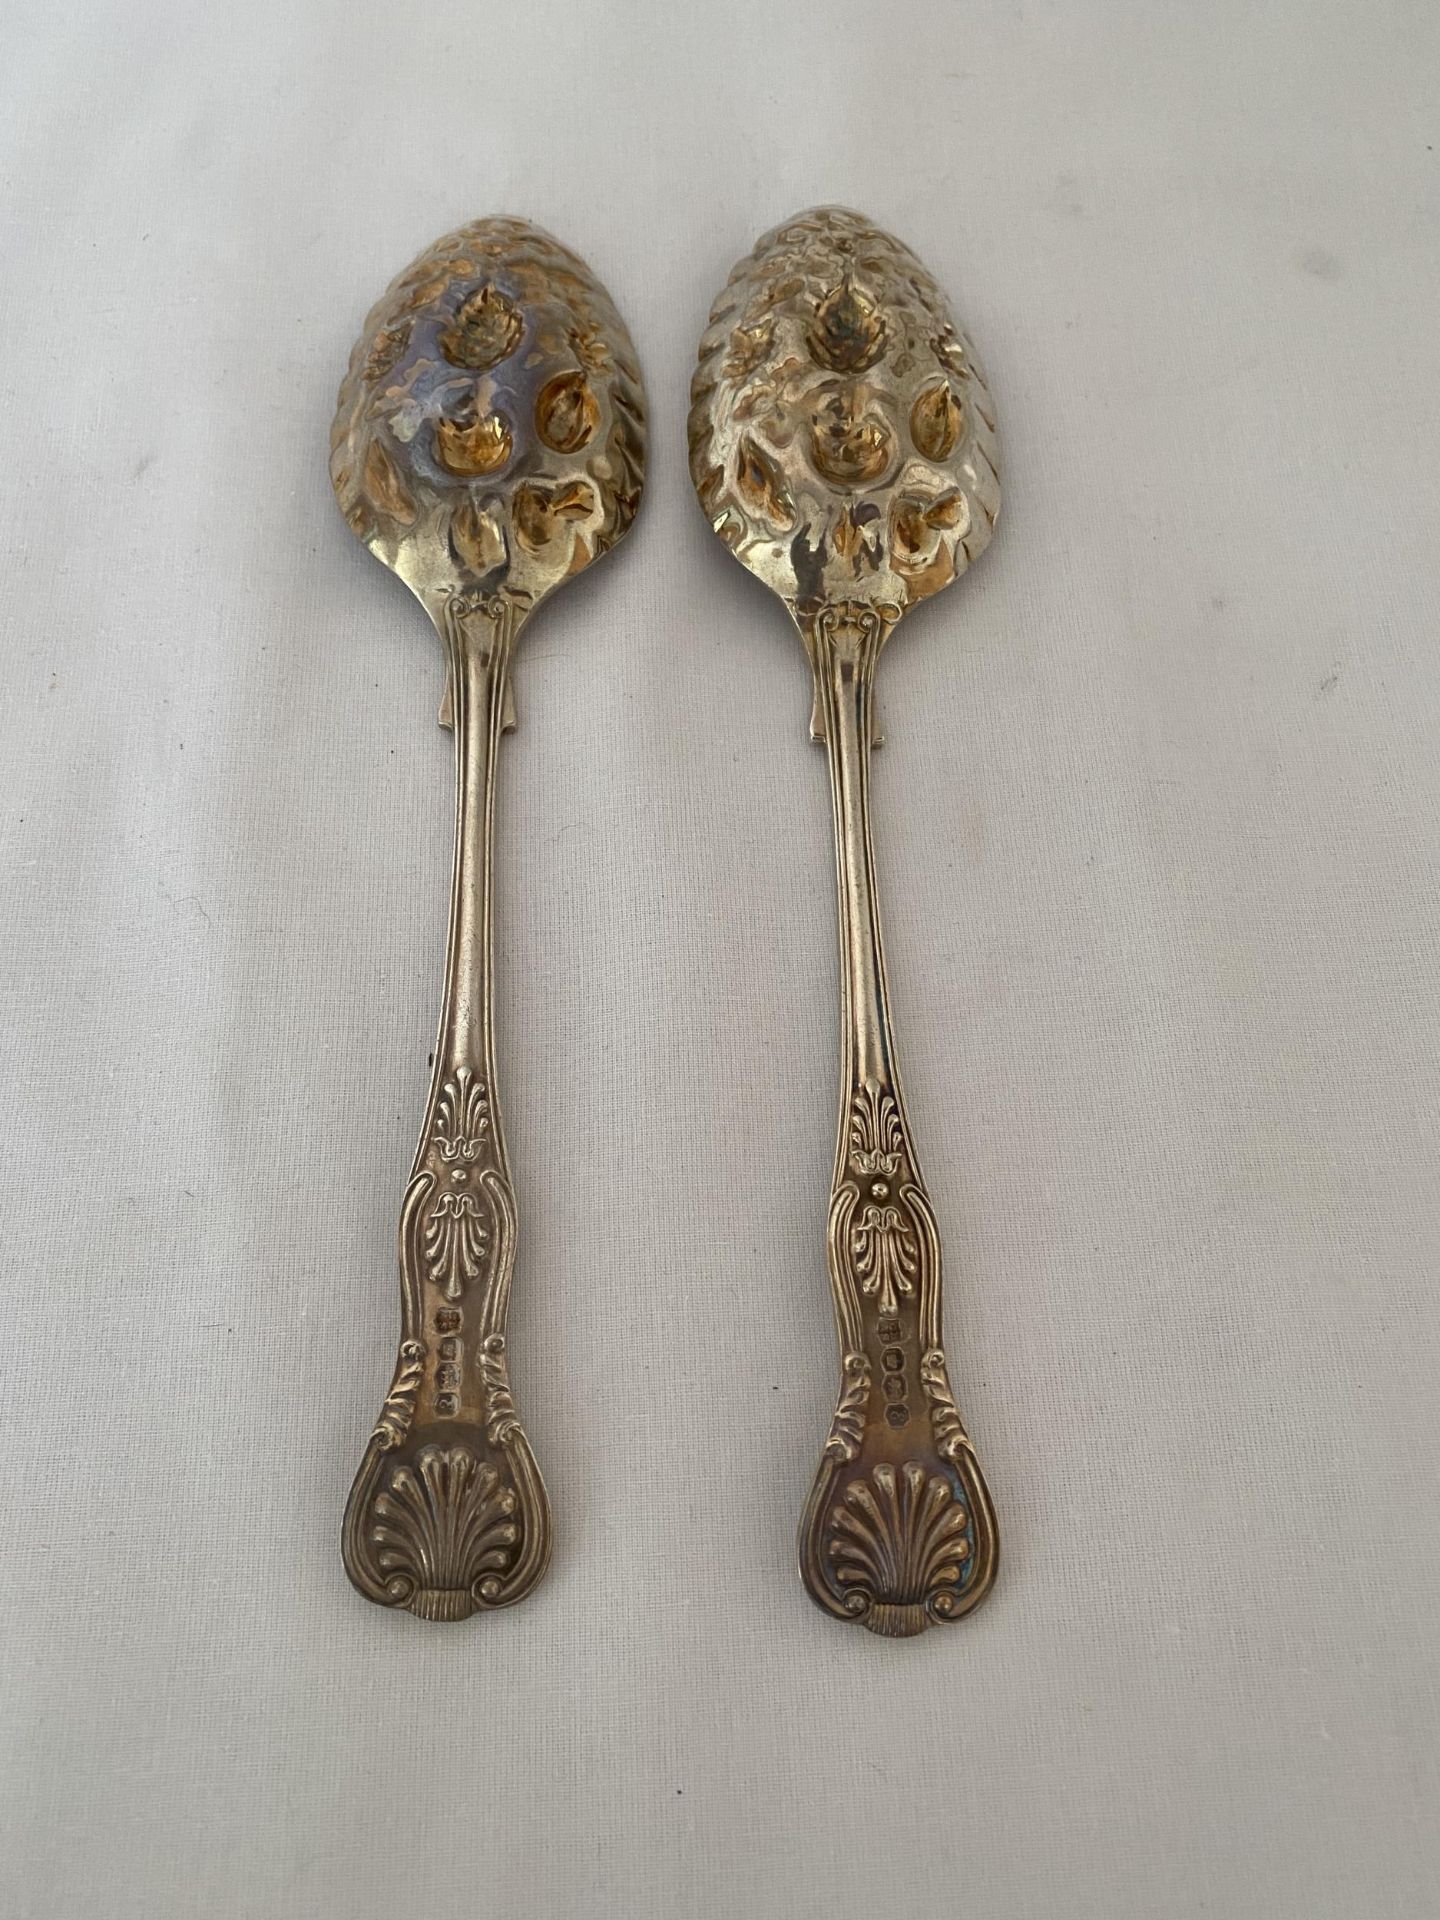 A PAIR OF ELIZABETH II 1972 HALLMARKED SHEFFIELD SILVER BERRY SPOONS, MAKER COOPER BROTHERS & SONS - Image 8 of 12